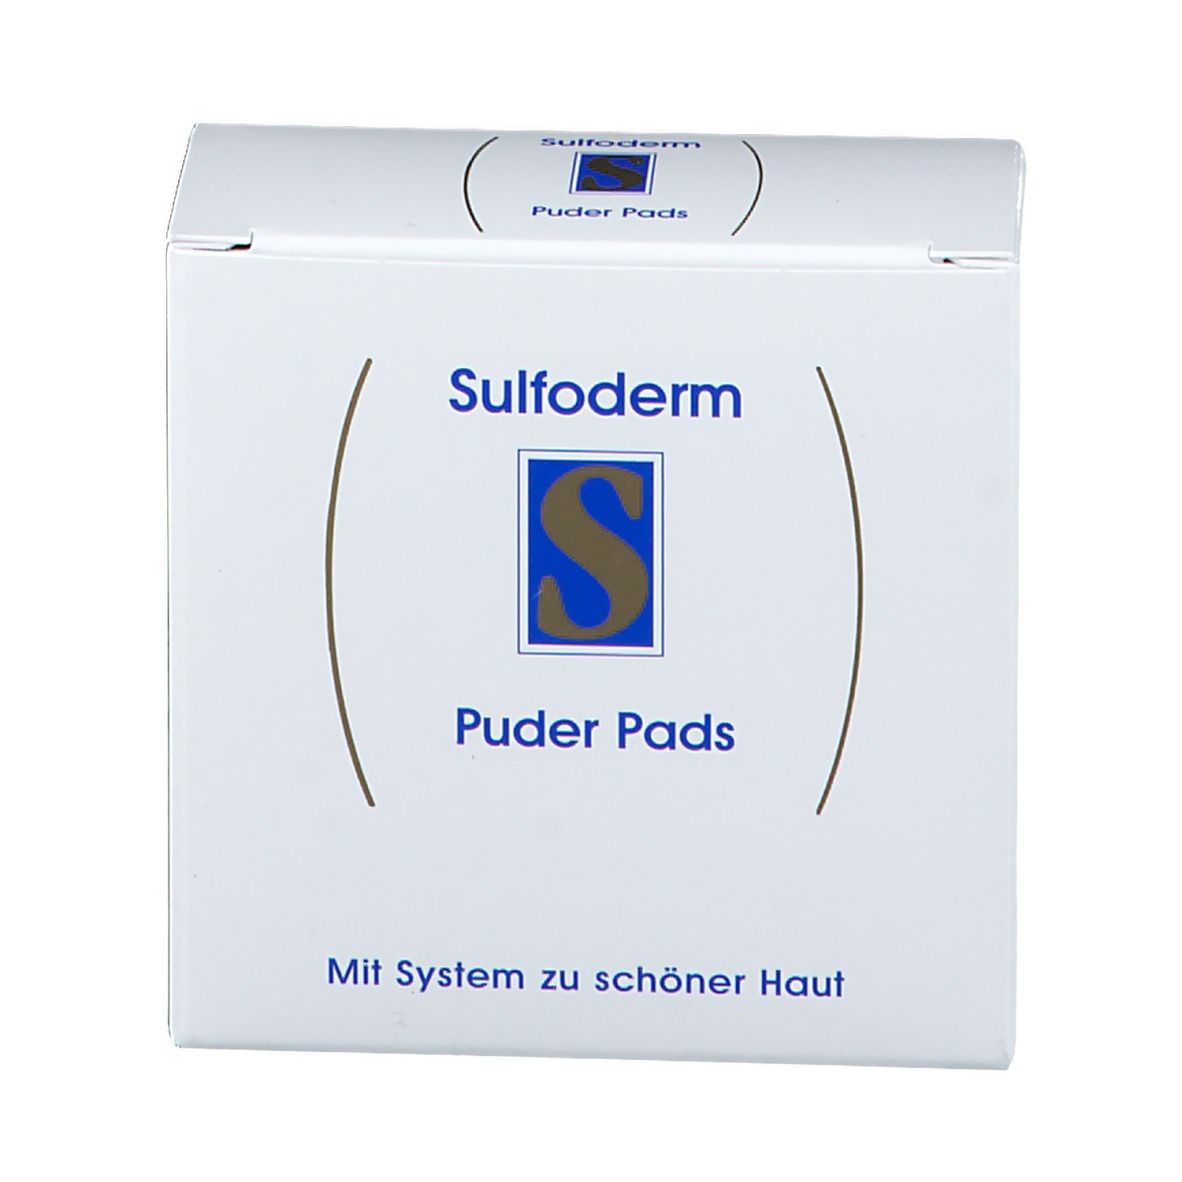 Sulfoderm® S Puder Pads